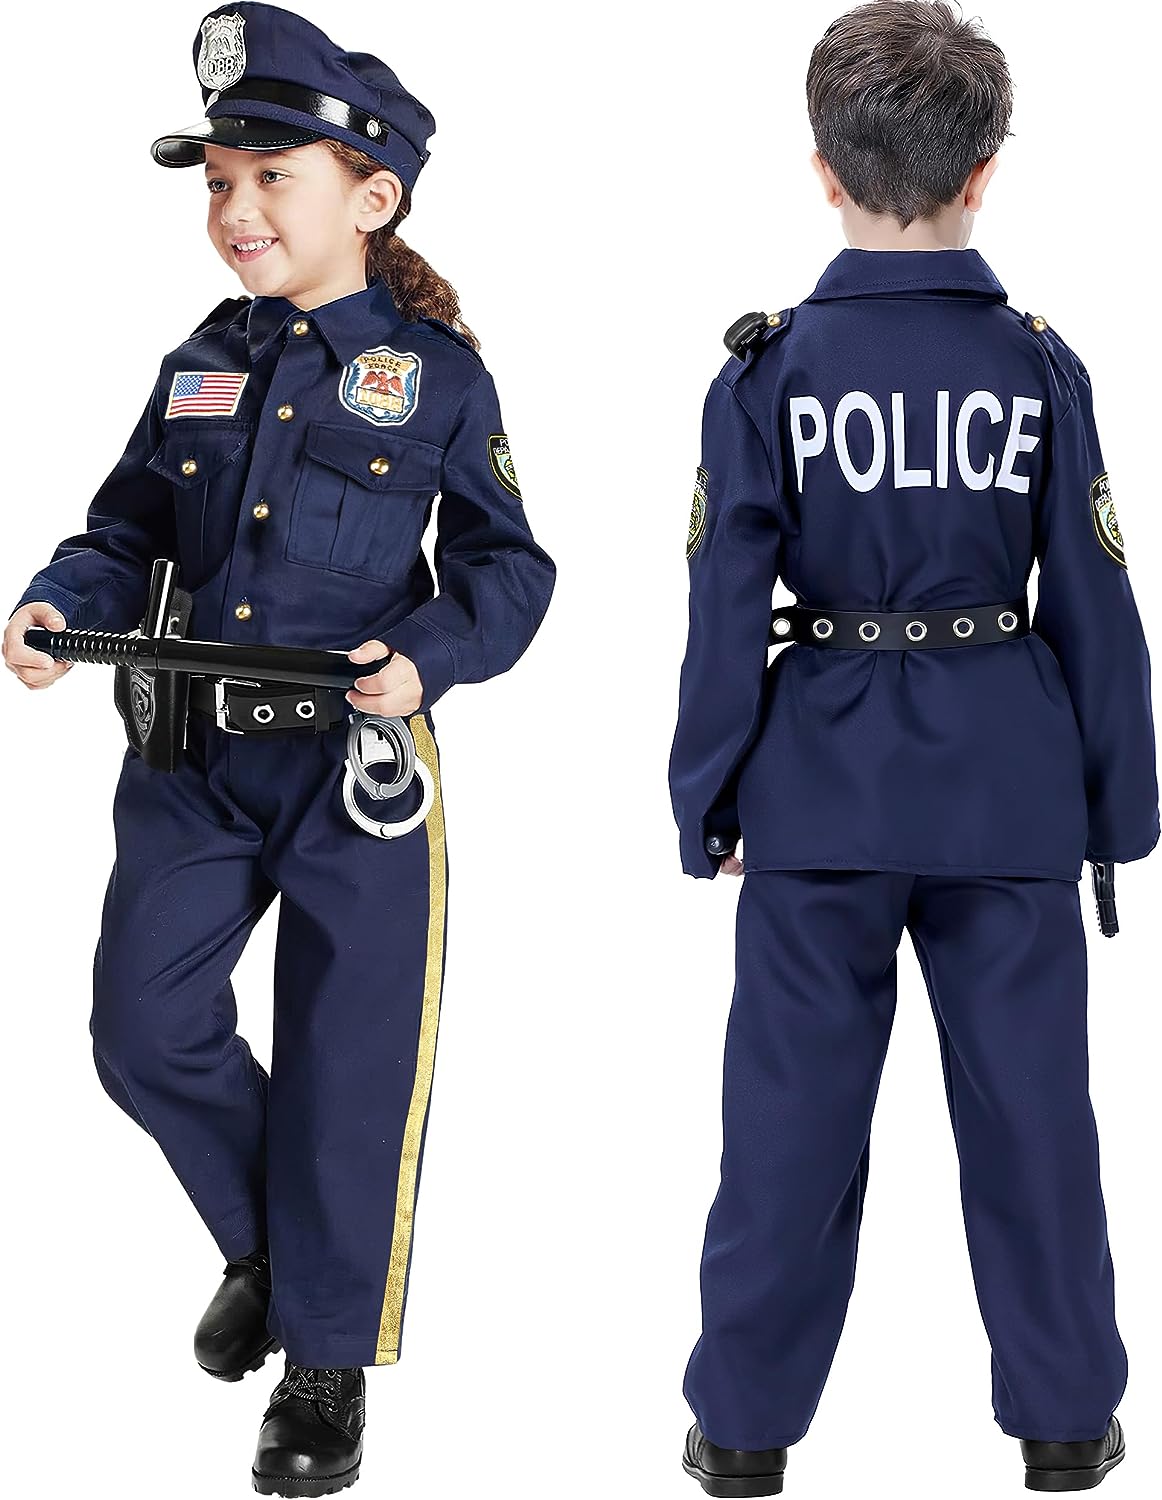 Joycover Police Costume Review - Discover Awesome Products